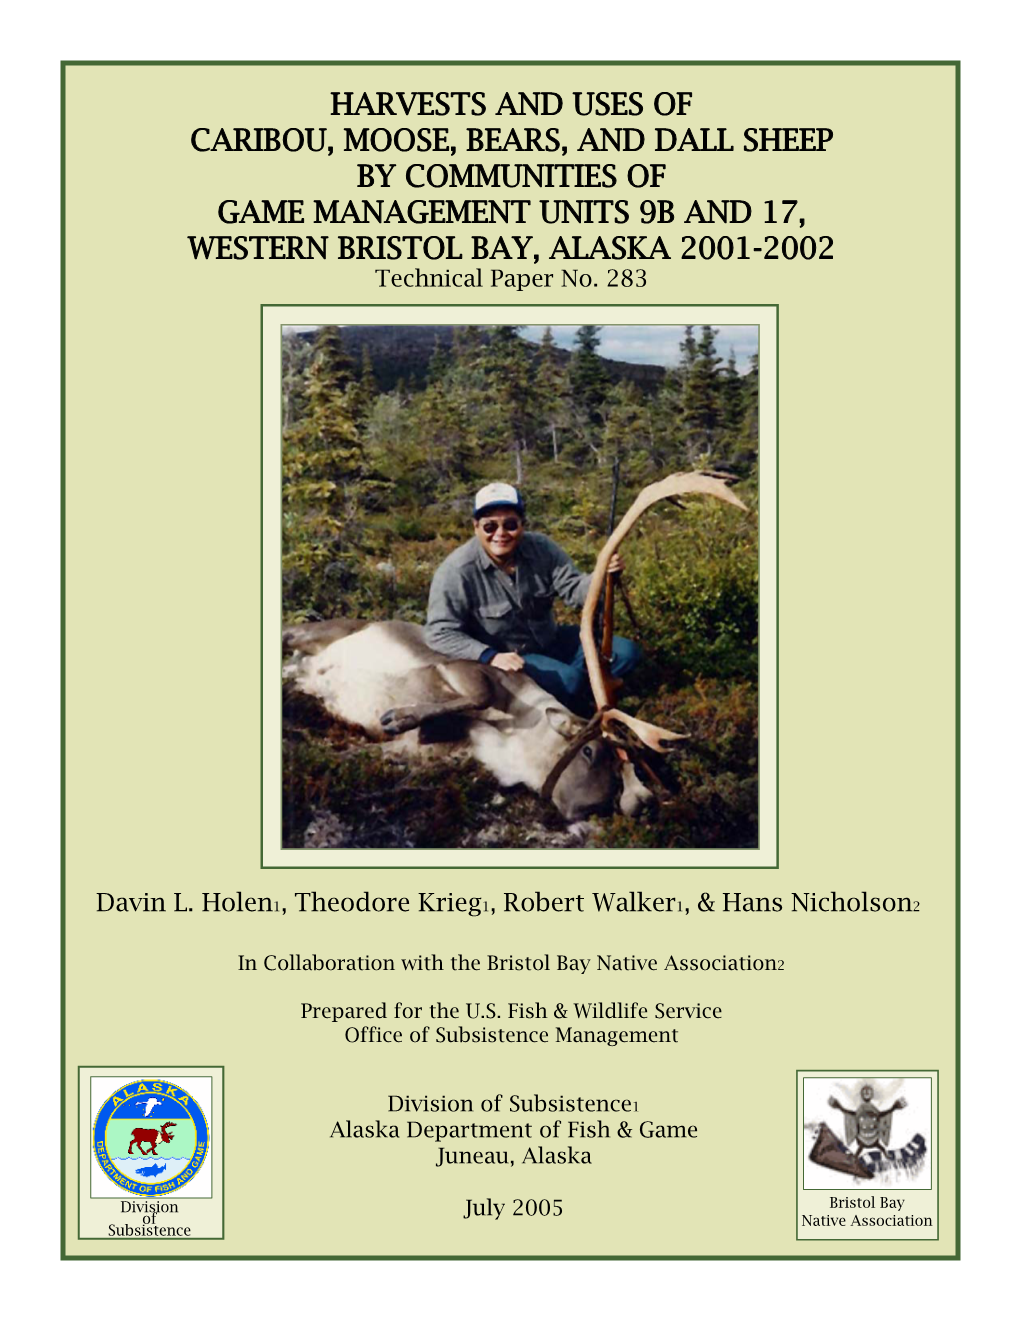 Harvests and Uses of Caribou, Moose, Bears, and Dall Sheep by Communities of Game Management Units 9B and 17, Western Bristol Bay, Alaska 2001-2002